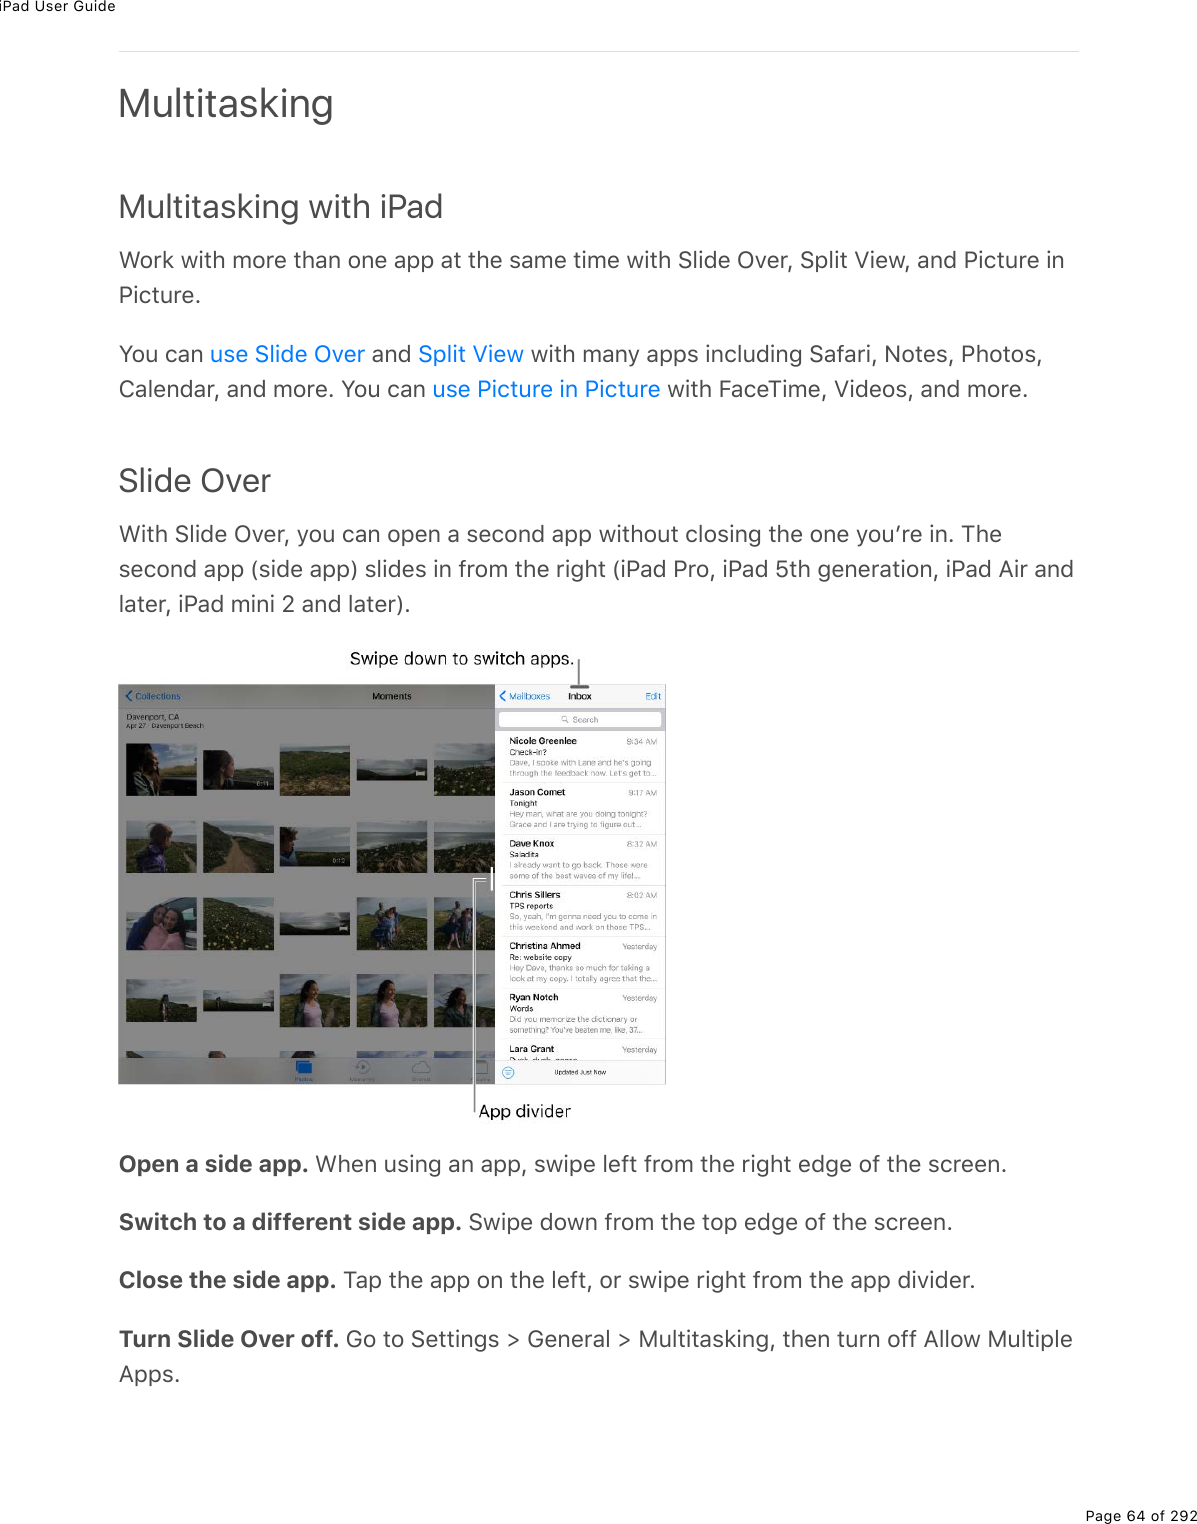 iPad User GuidePage 64 of 292MultitaskingMultitasking with iPadWork with more than one app at the same time with Slide Over, Split View, and Picture inPicture.You can   and   with many apps including Safari, Notes, Photos,Calendar, and more. You can   with FaceTime, Videos, and more.Slide OverWith Slide Over, you can open a second app without closing the one youʼre in. Thesecond app (side app) slides in from the right (iPad Pro, iPad 5th generation, iPad Air andlater, iPad mini 2 and later).Open a side app. When using an app, swipe left from the right edge of the screen.Switch to a different side app. Swipe down from the top edge of the screen.Close the side app. Tap the app on the left, or swipe right from the app divider.Turn Slide Over off. Go to Settings &gt; General &gt; Multitasking, then turn off Allow MultipleApps.use Slide Over Split Viewuse Picture in Picture